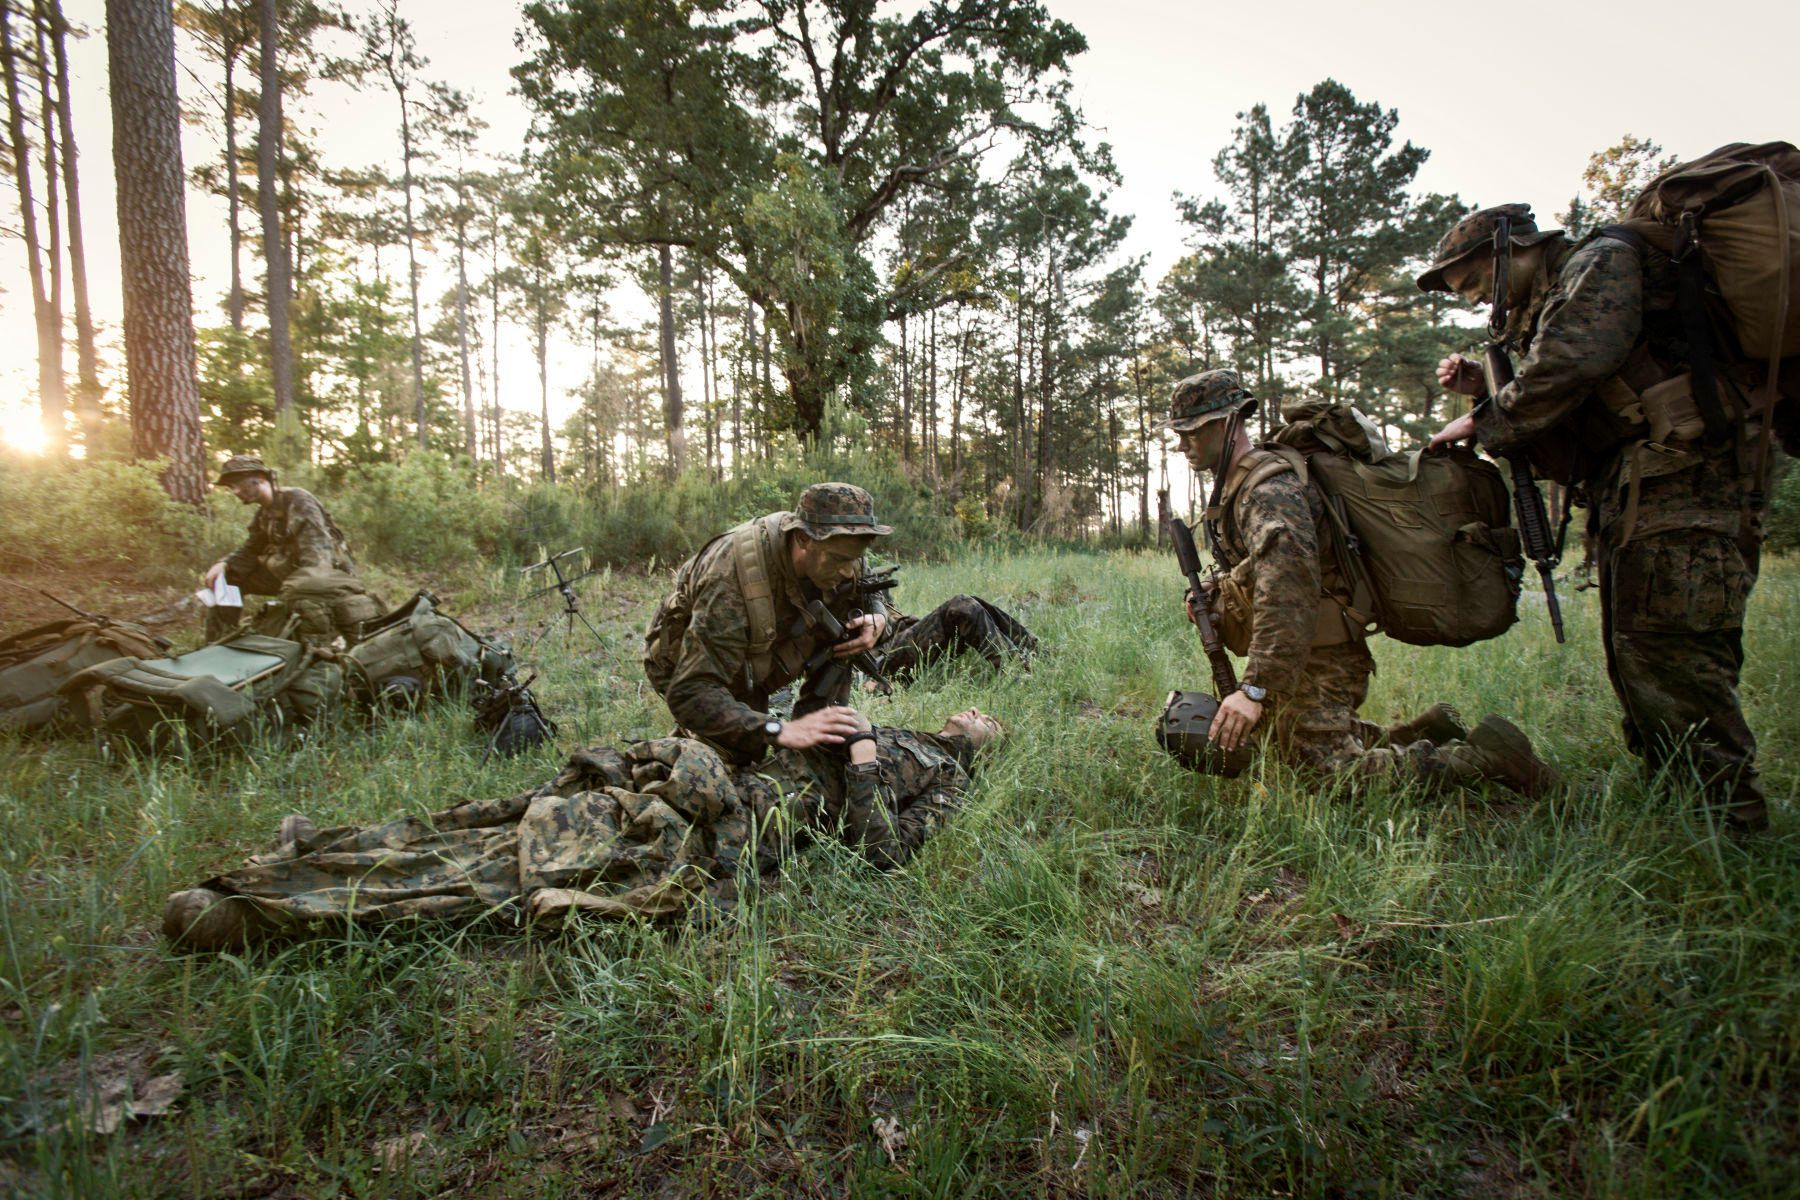 How To Attend to A Dead Marine | Vance Jacobs Photographer